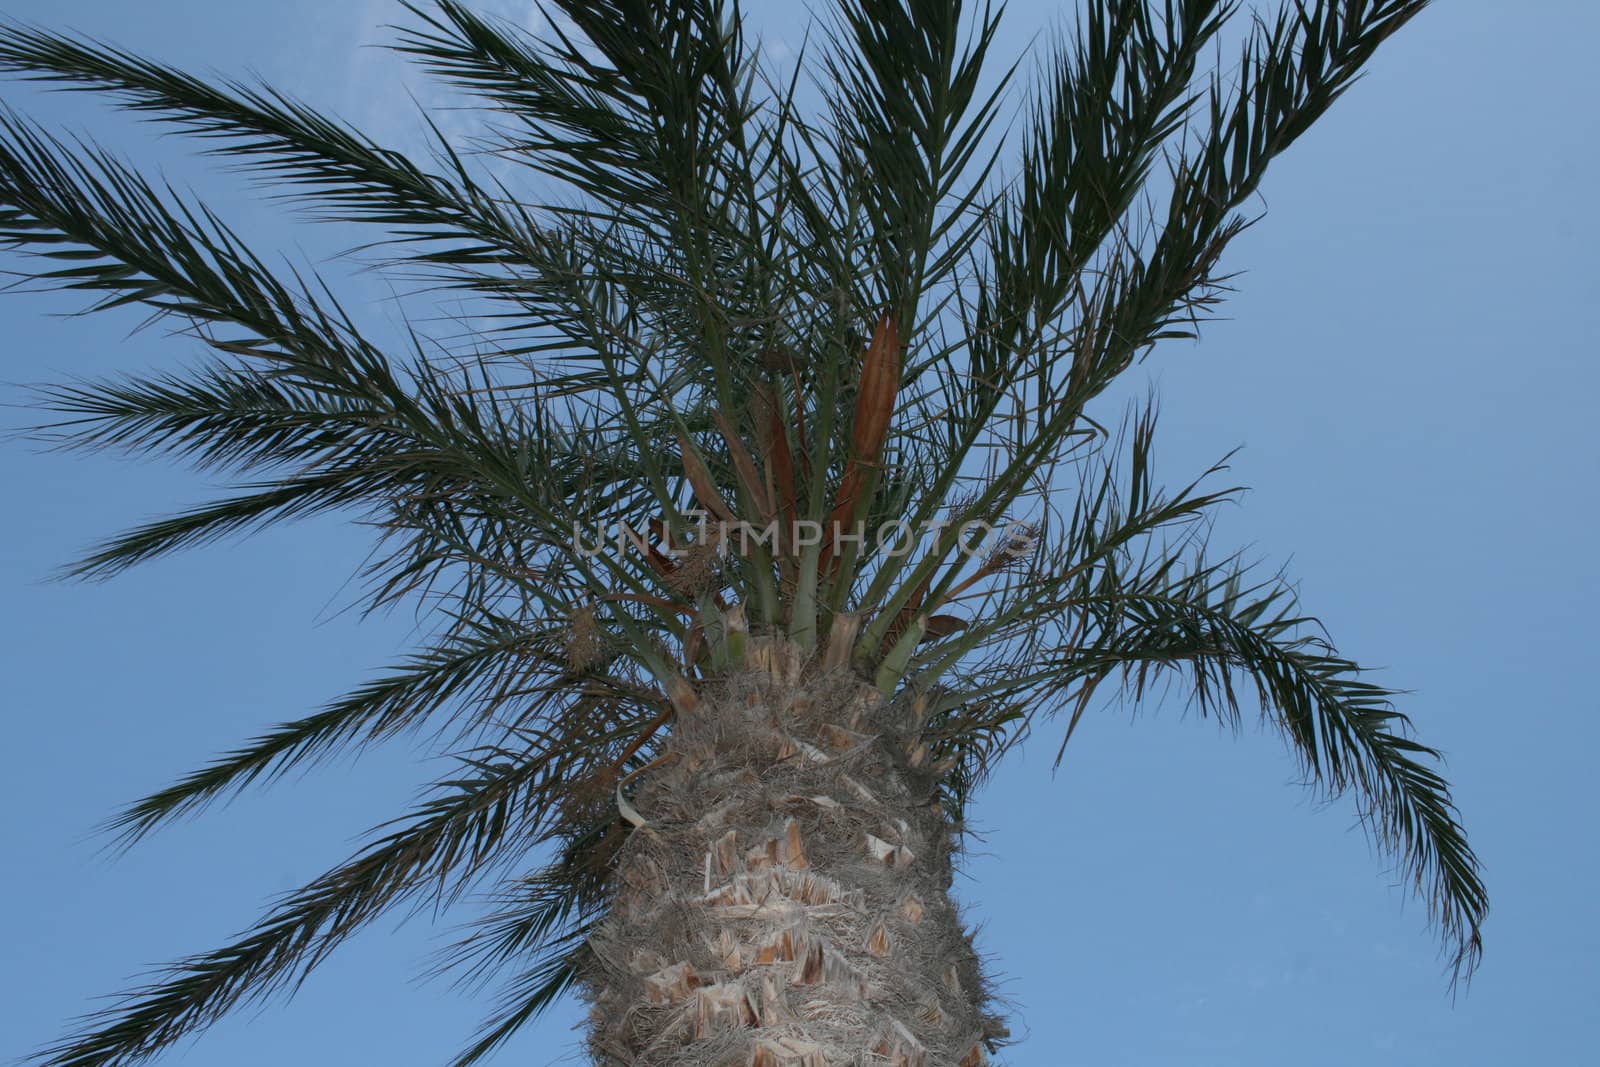 The top of a palm tree against the sky